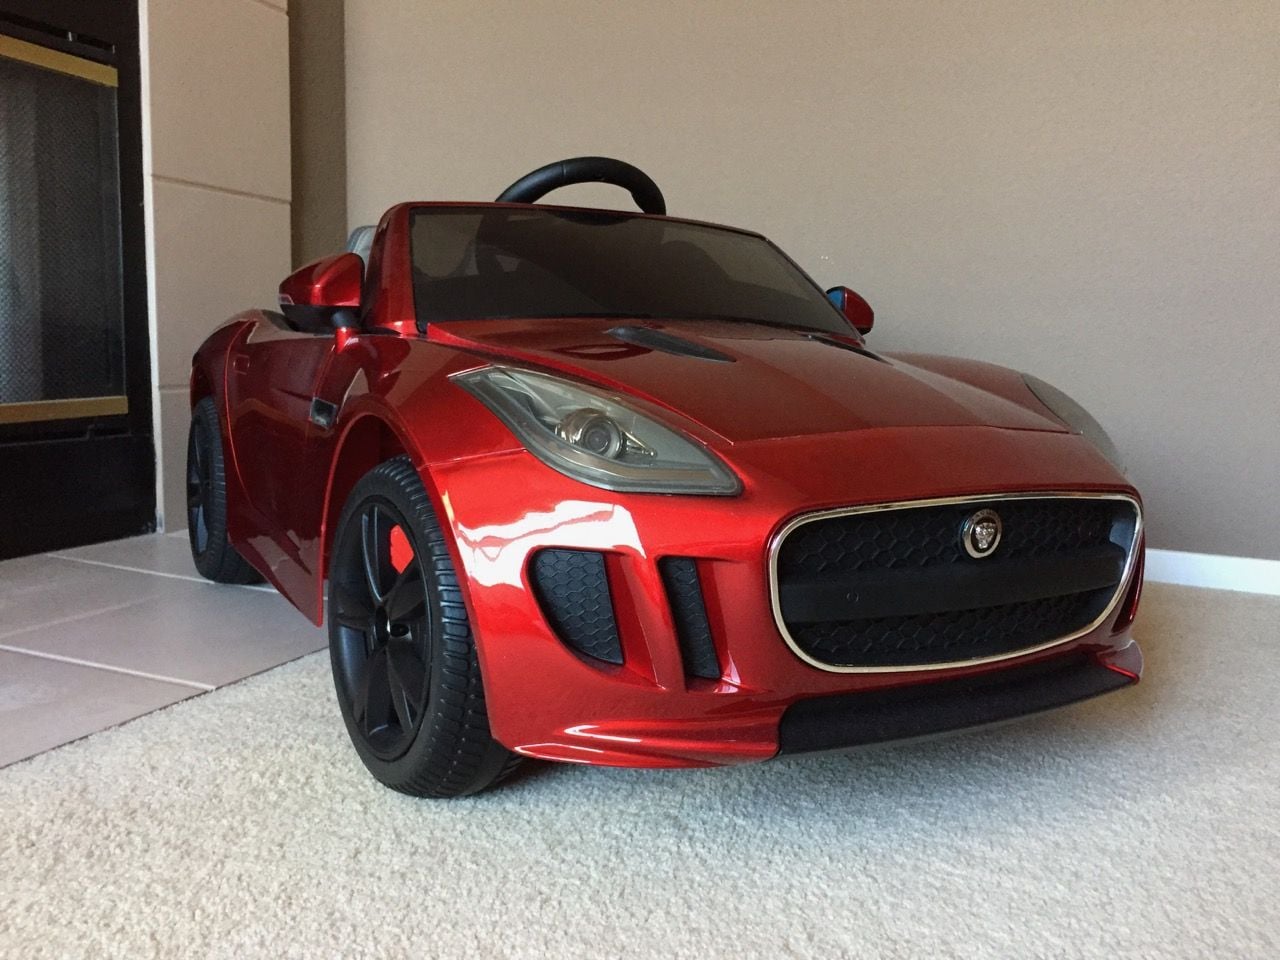 Miscellaneous - Kiddie Car - FType in IRR Officially Licensed Product - Used - All Years Any Make All Models - Cotati, CA 94931, United States